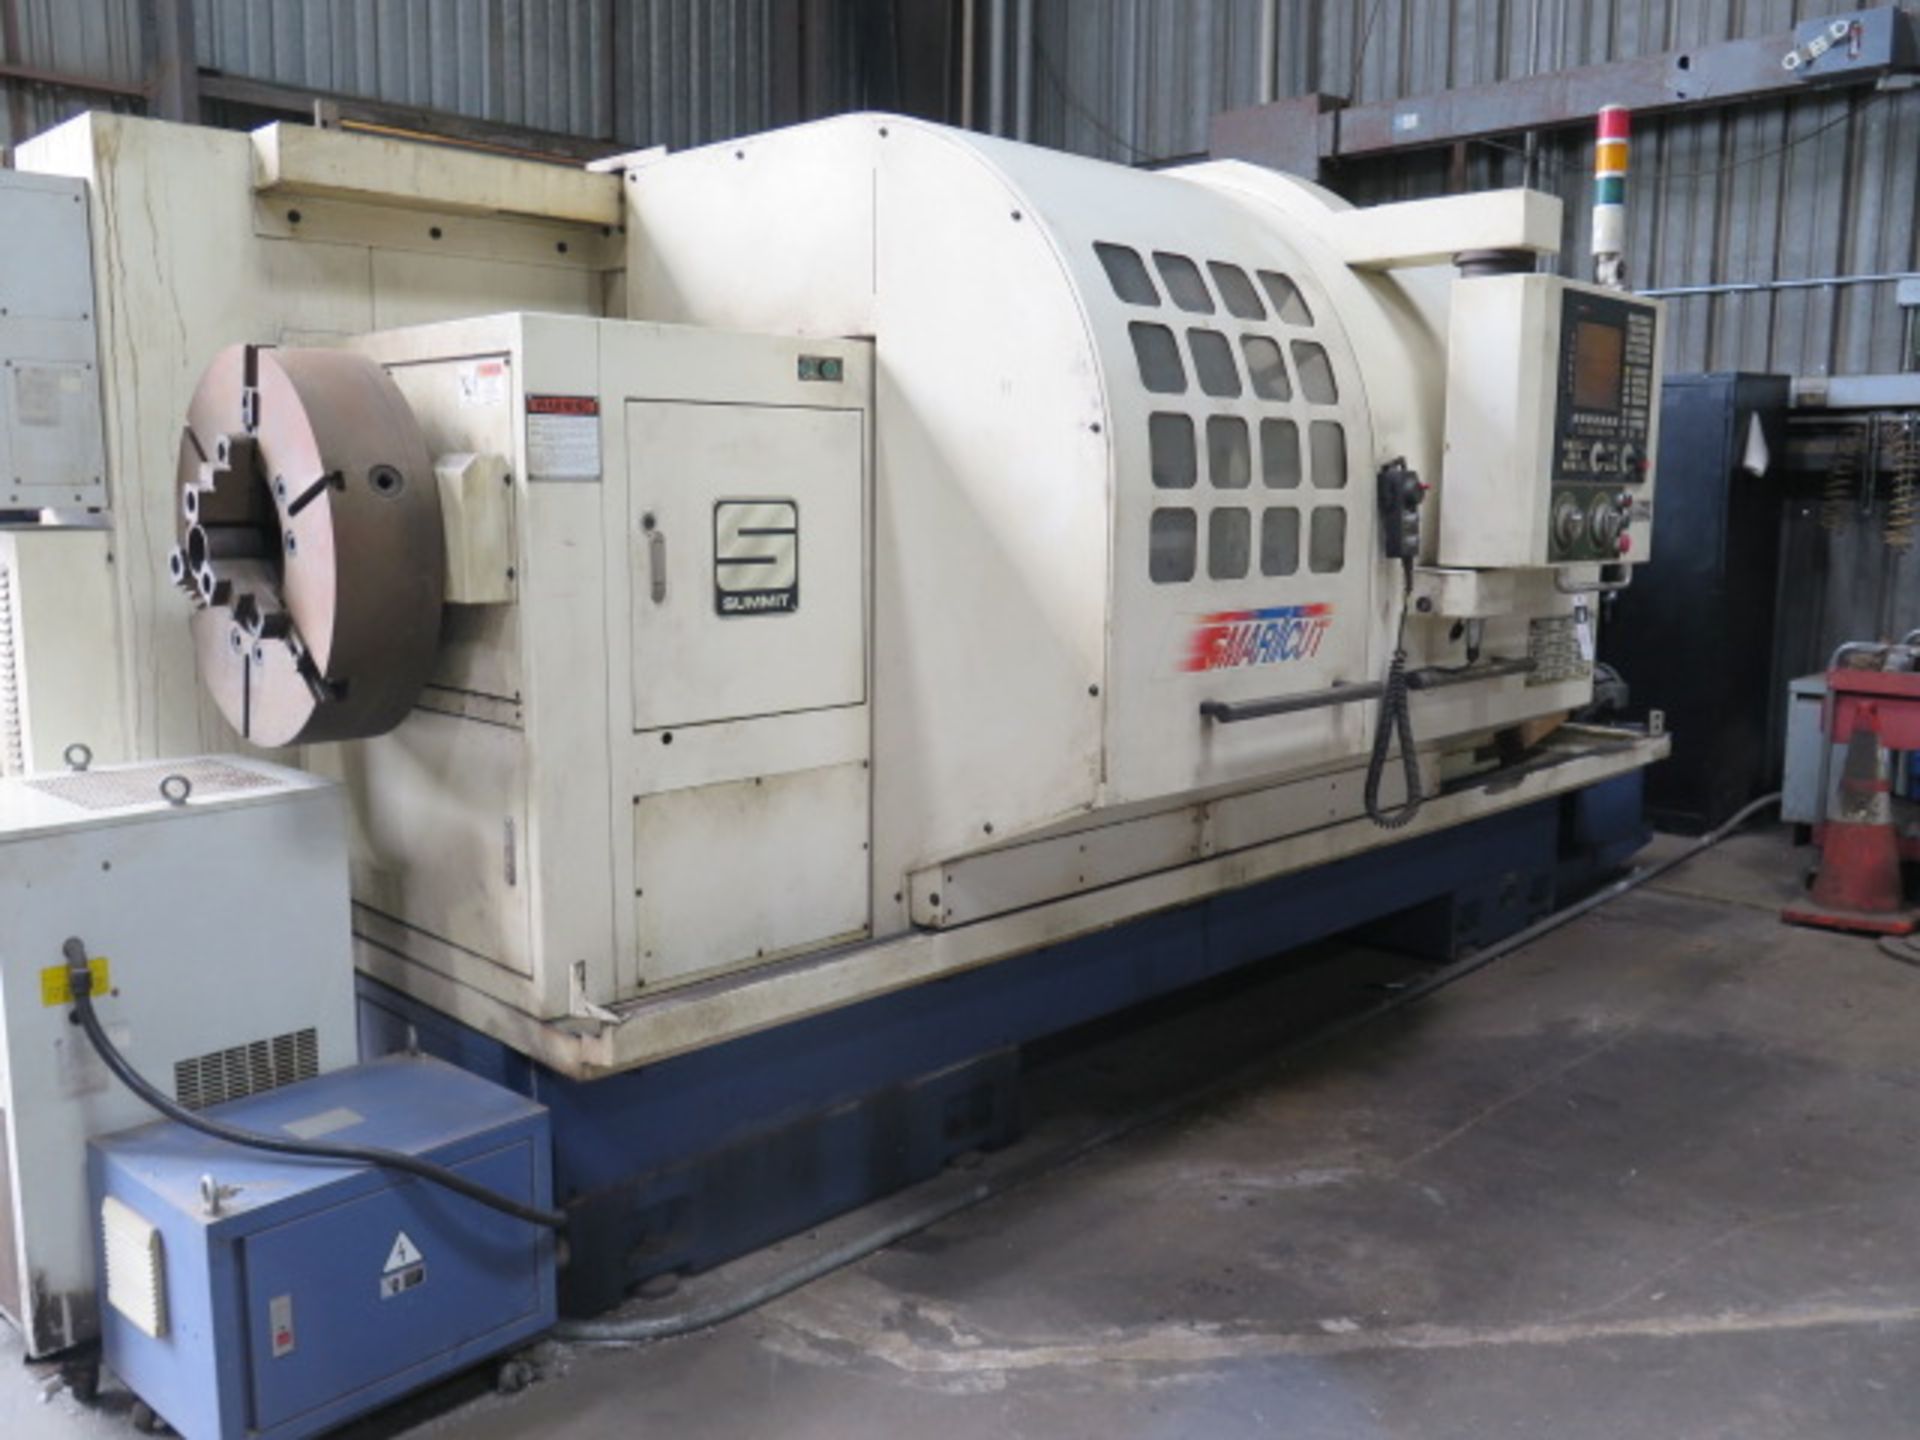 Summit “Smart Cut” SC30-9X80M Big Bore CNC Turning Center,Fagor Controls, 9” Spindle Bore,SOLD AS IS - Image 2 of 26